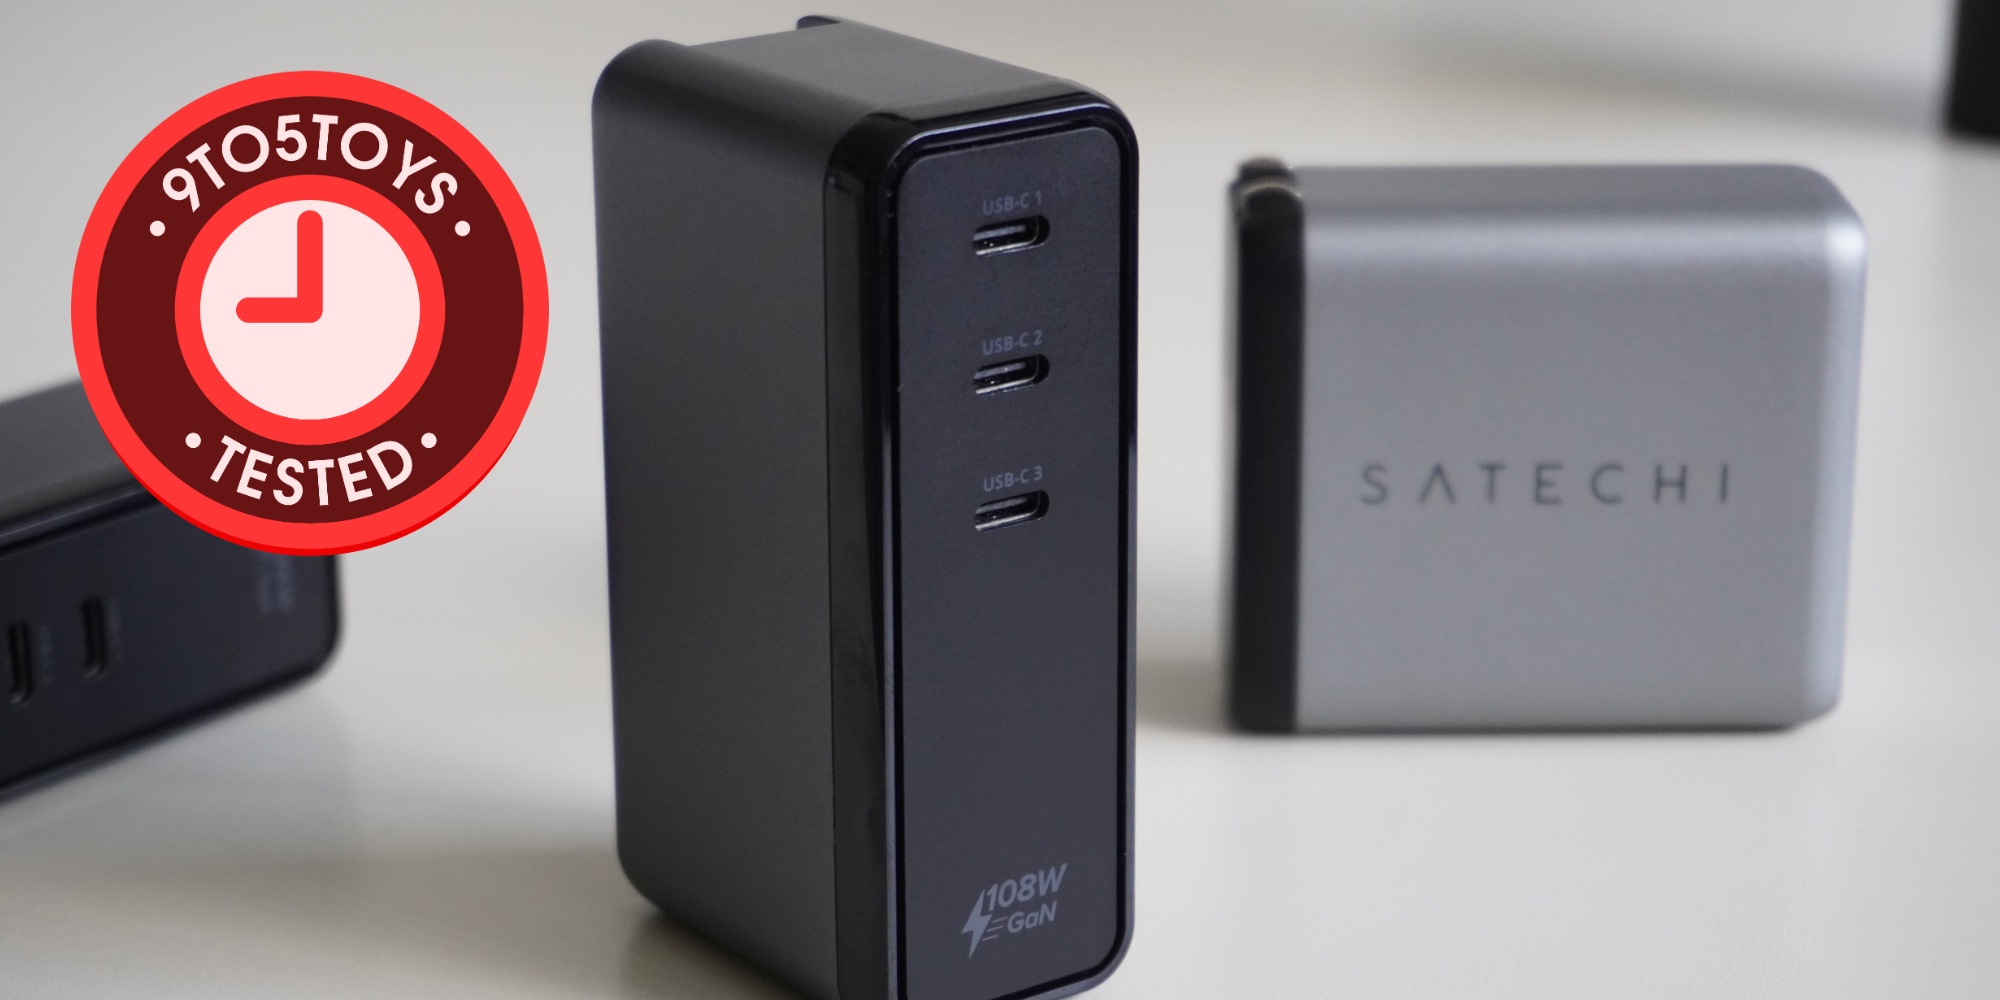 Satechi's USB-C hub can hold an SSD if you have more money than